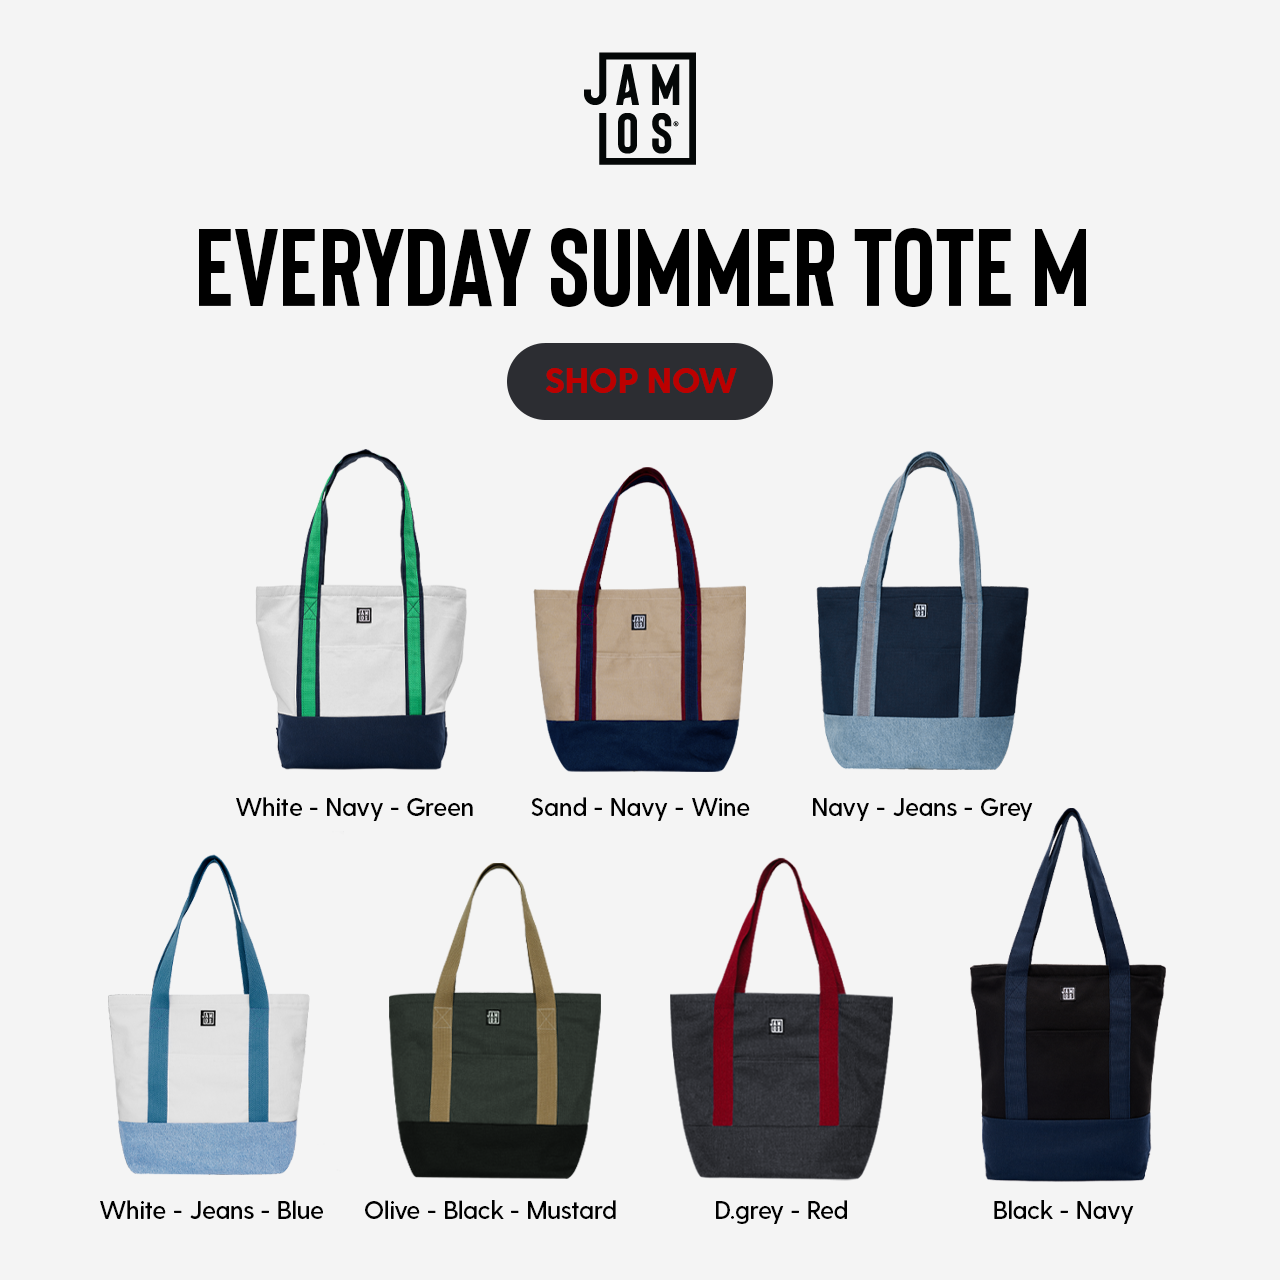 Everyday Summer Tote M